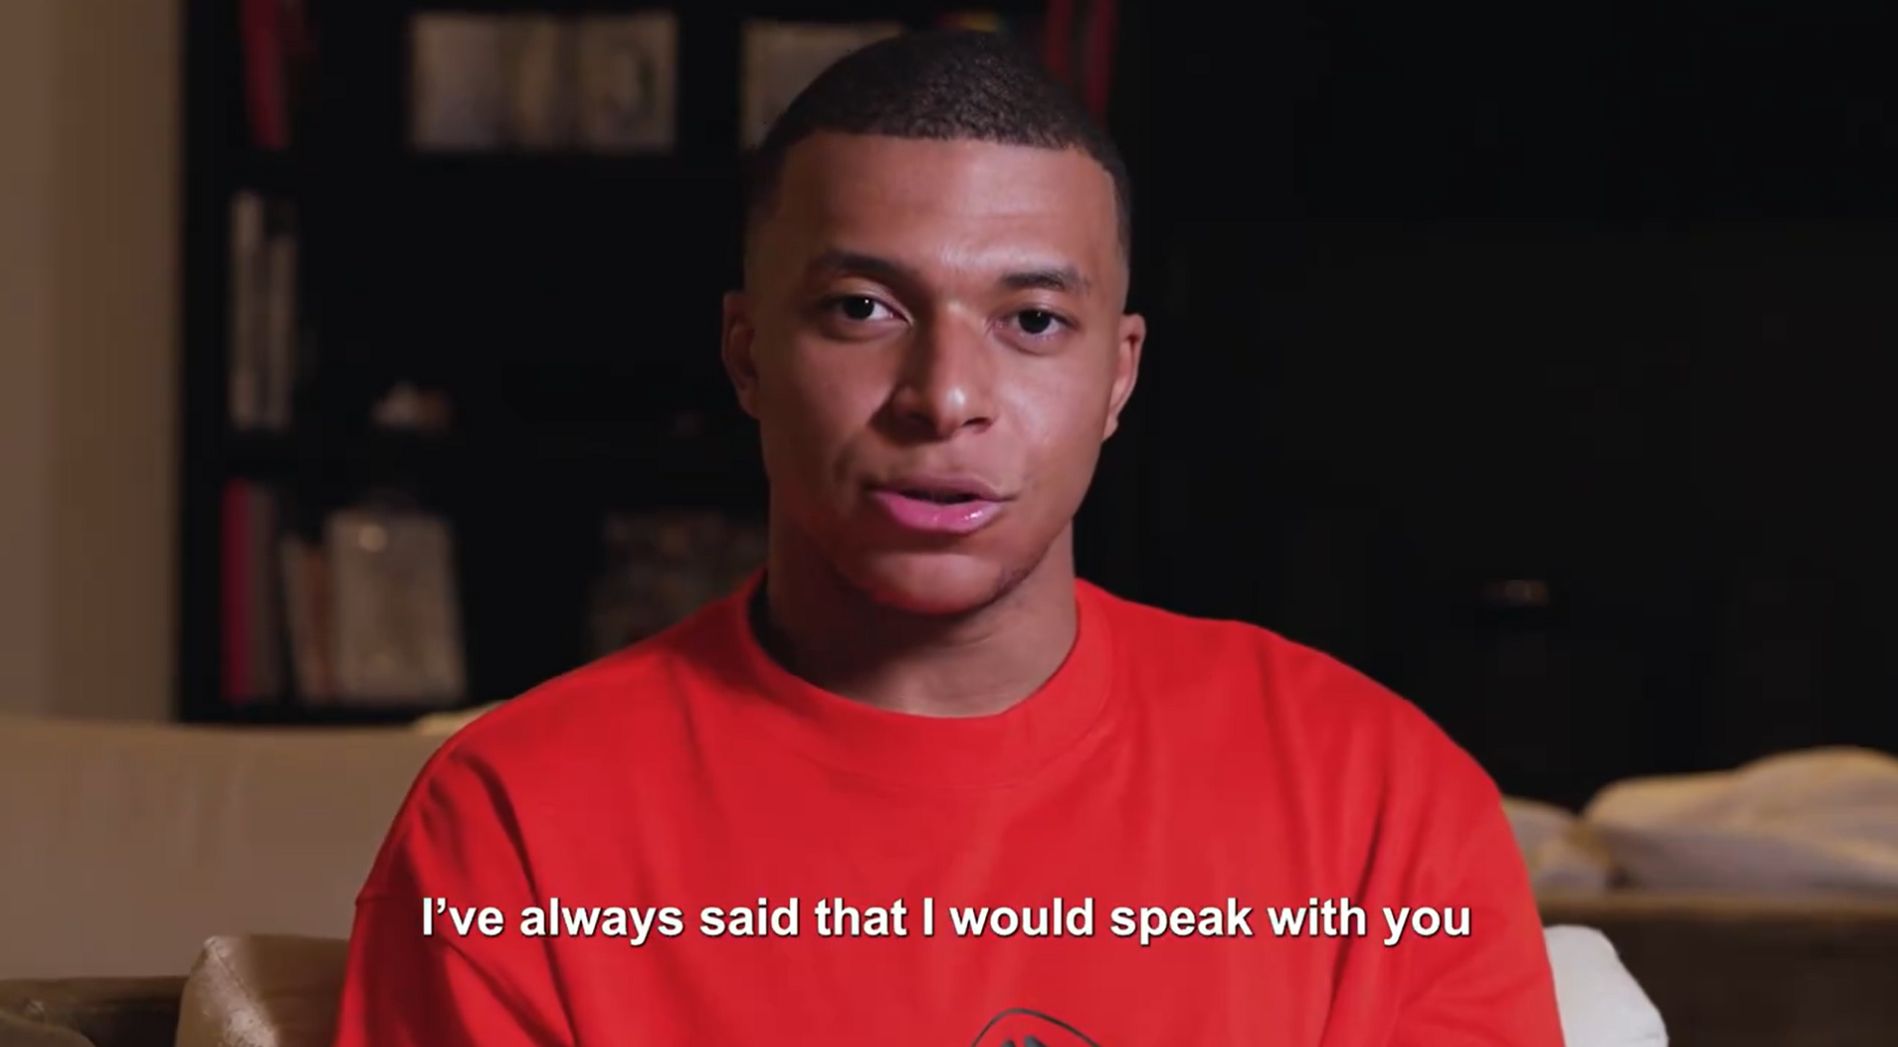 WATCH: Kylian Mbappe’s farewell video to Paris Saint-Germain three days after Champions League exit